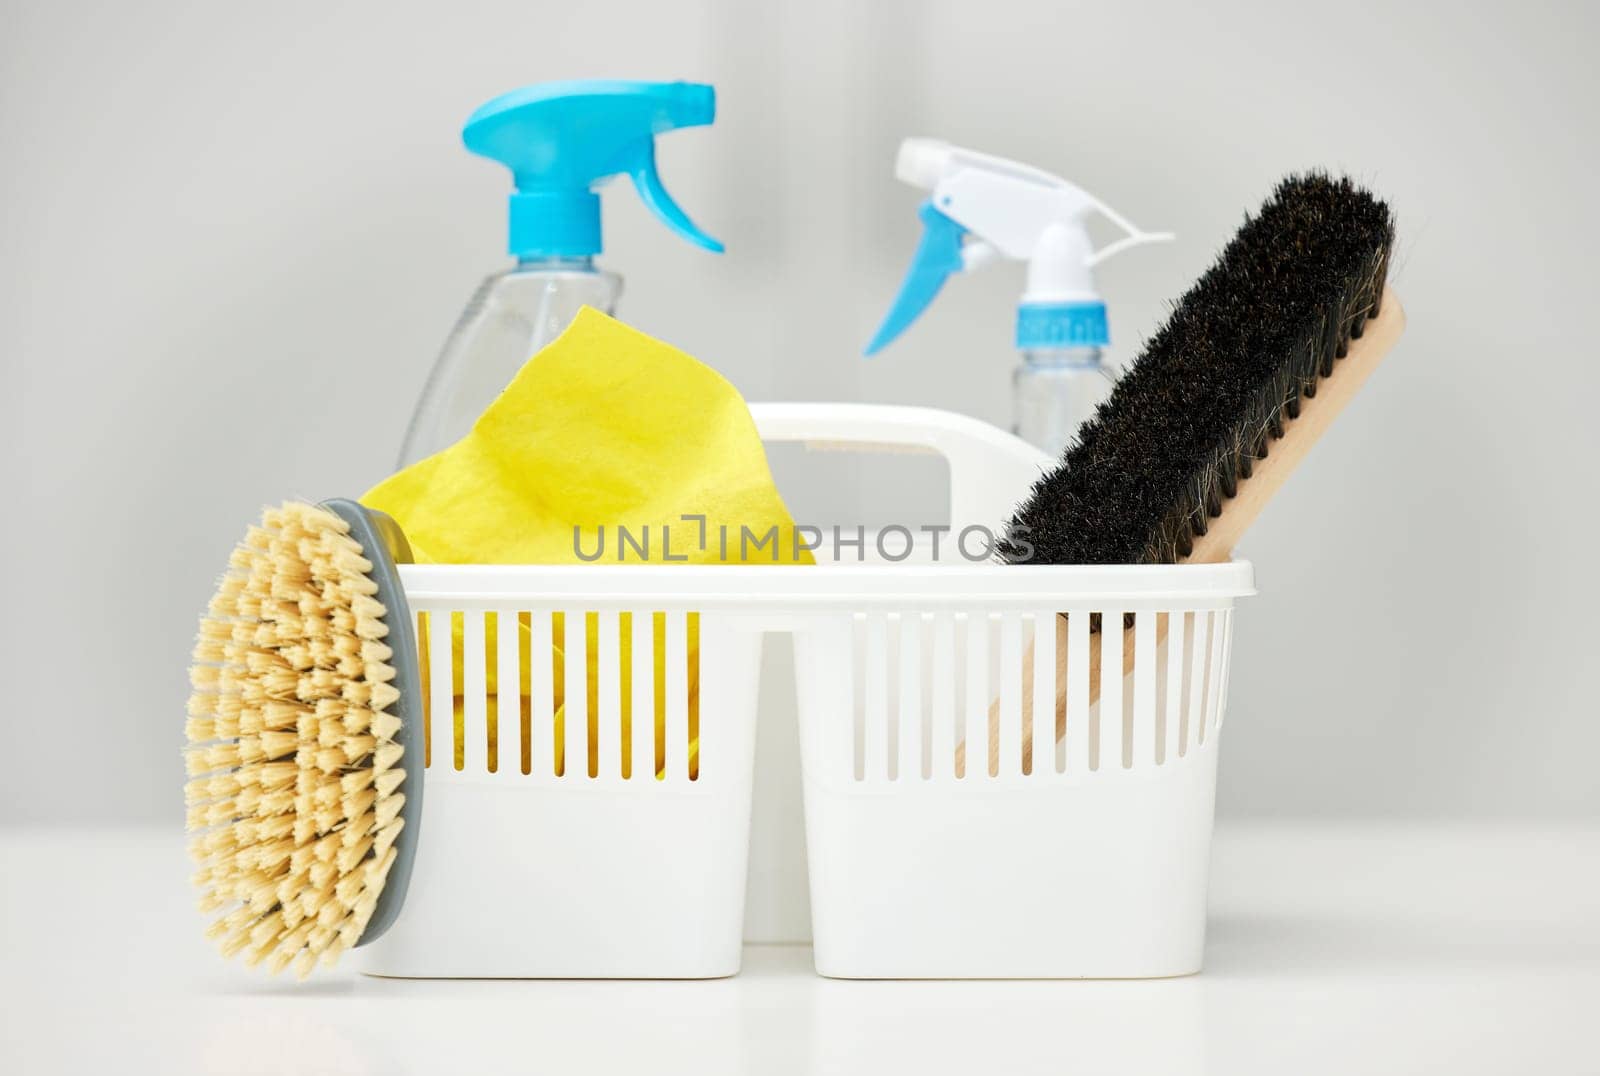 Table, brush or basket with supplies, spray bottle or chemical for bacteria, wellness or dirty mess in home. Grey background, cleaning service or ready for washing with product, liquid soap or gloves by YuriArcurs